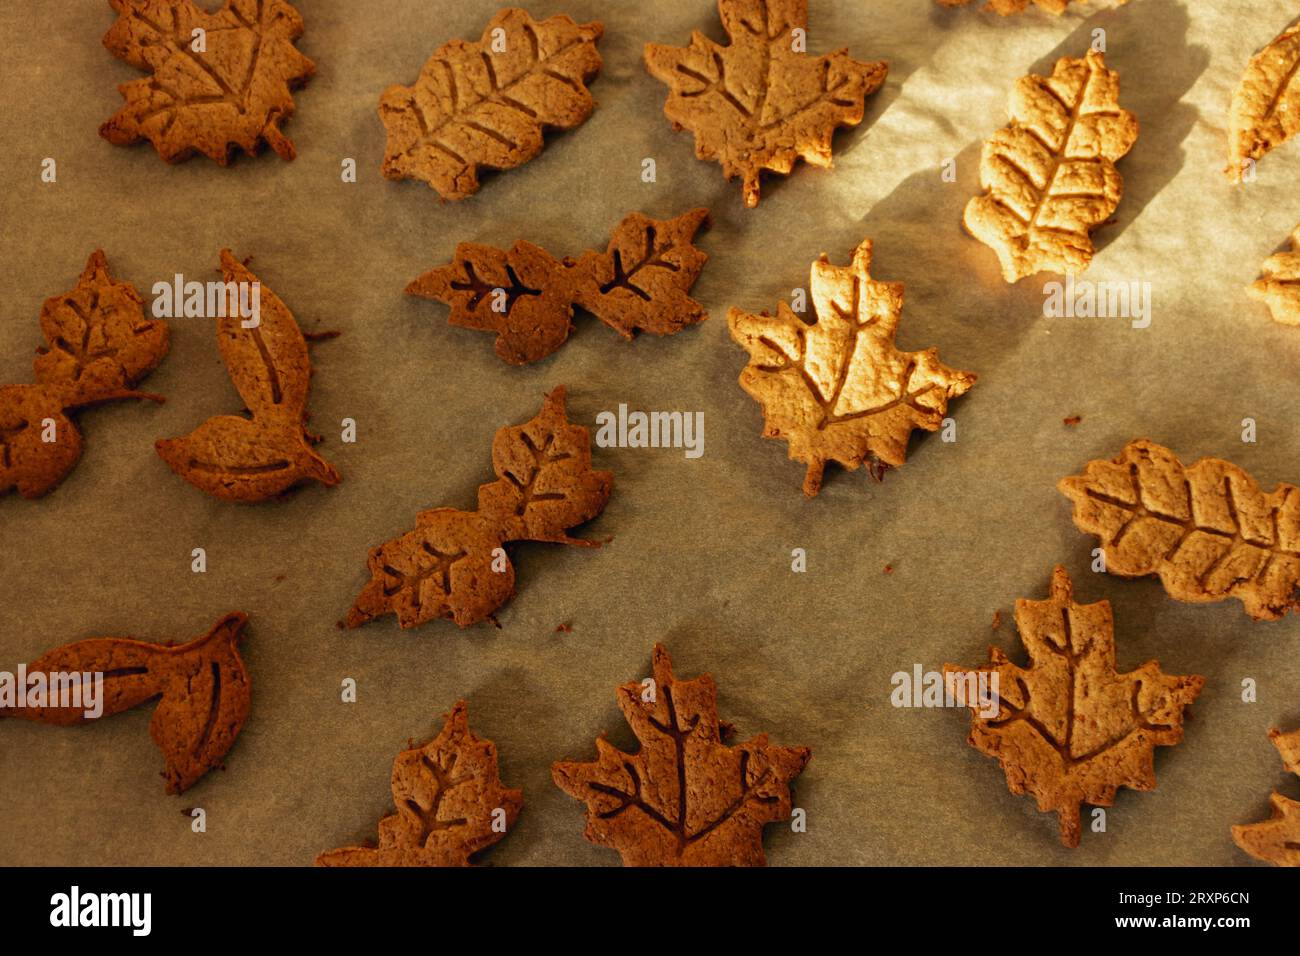 Autumn leaf shaped cookie of gingerbread dough. Autumn festive cookies on cooking parchment. Handmade bakery. Gingerbread cookie form. Stock Photo